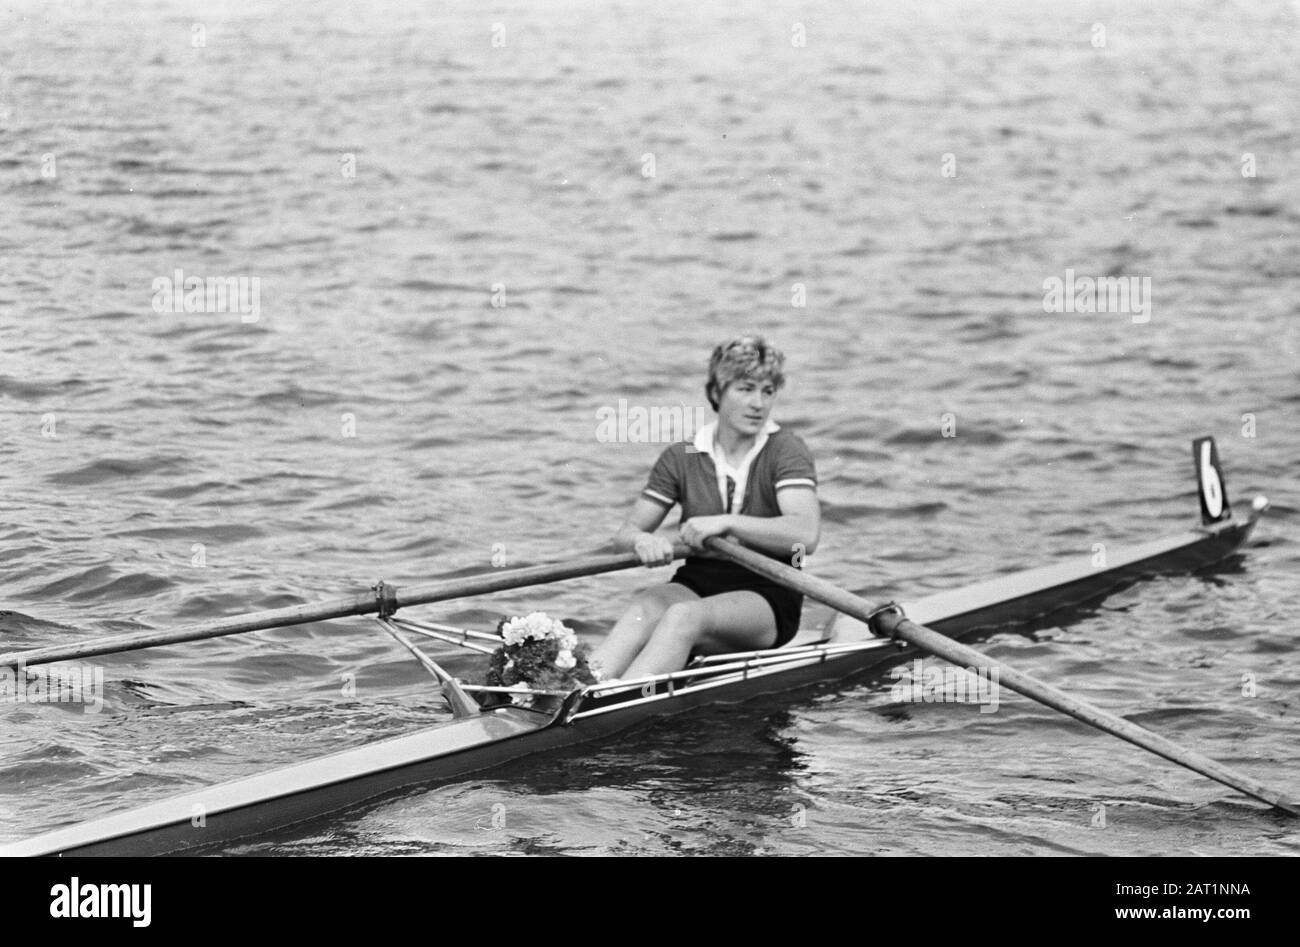 European rowing championships ladies in Duisburg, nr. 14 French skiffeuse Renee Camus Date: 20 August 1965 Location: Duisburg Keywords: Rowing, Championships Stock Photo